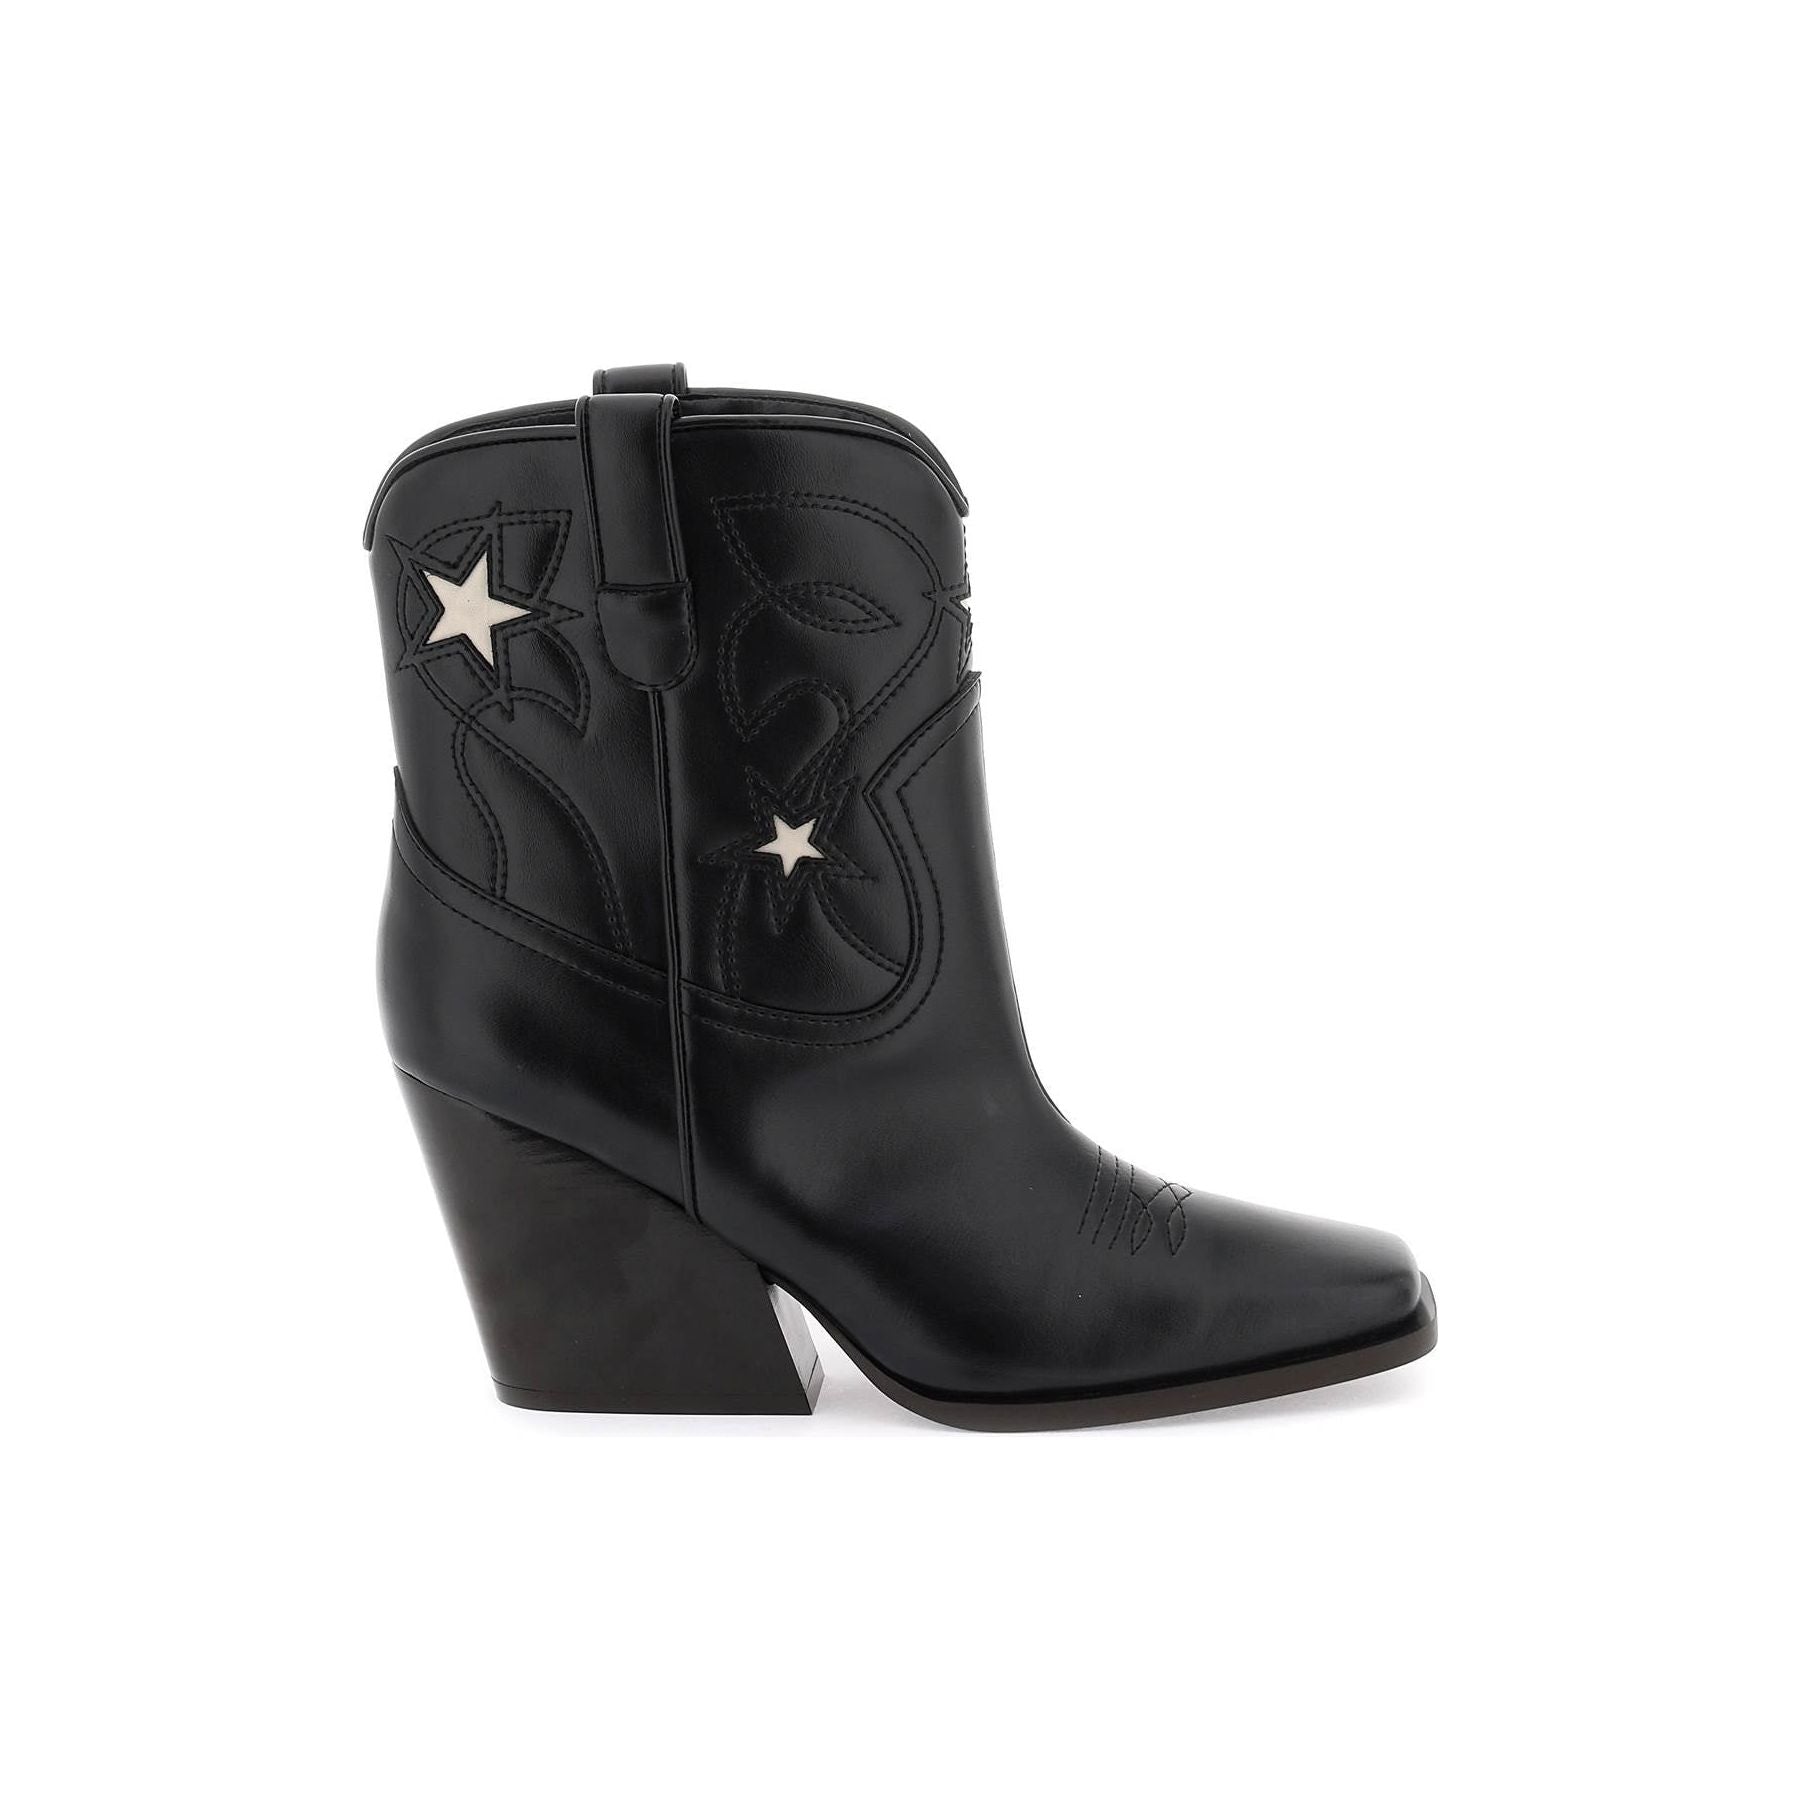 Texan Ankle Boots With Star Embroidery